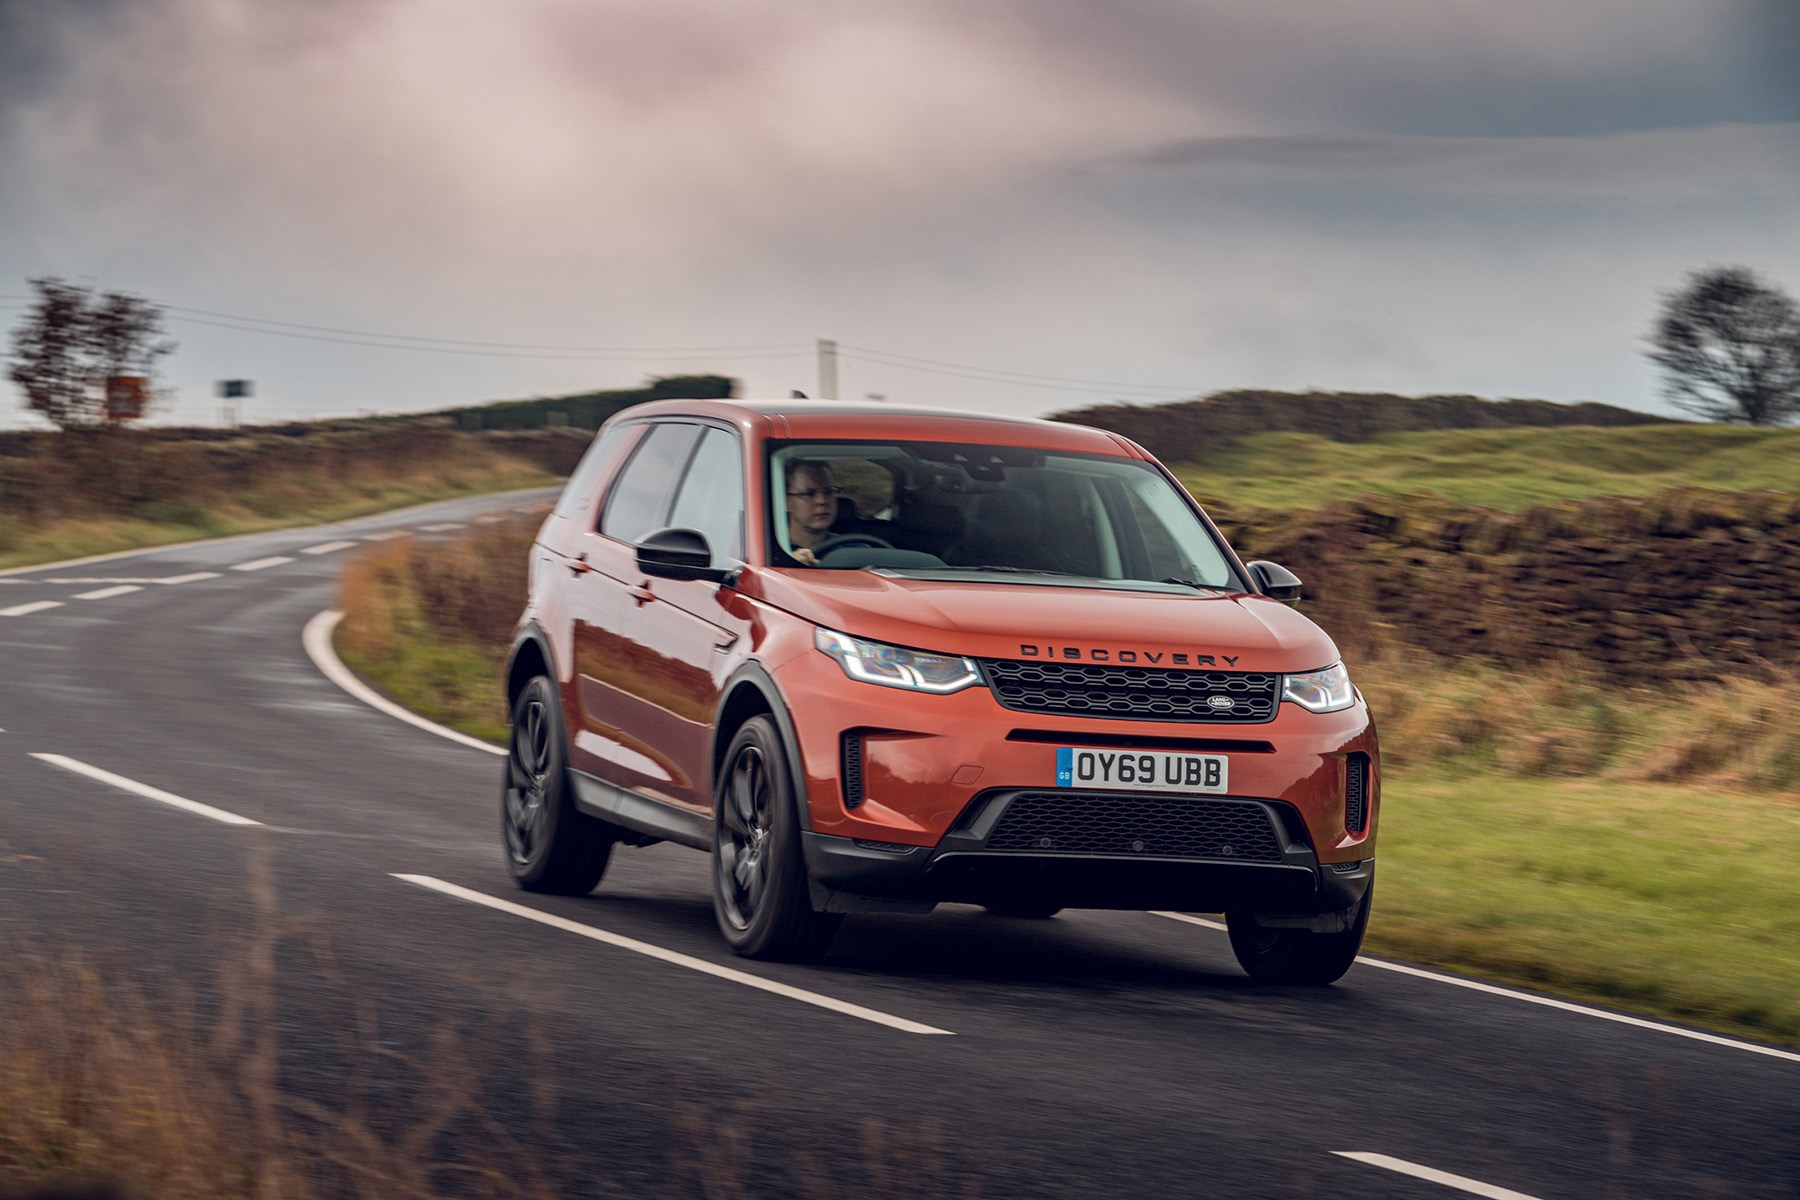 2019 Land Rover Discovery Sport handling